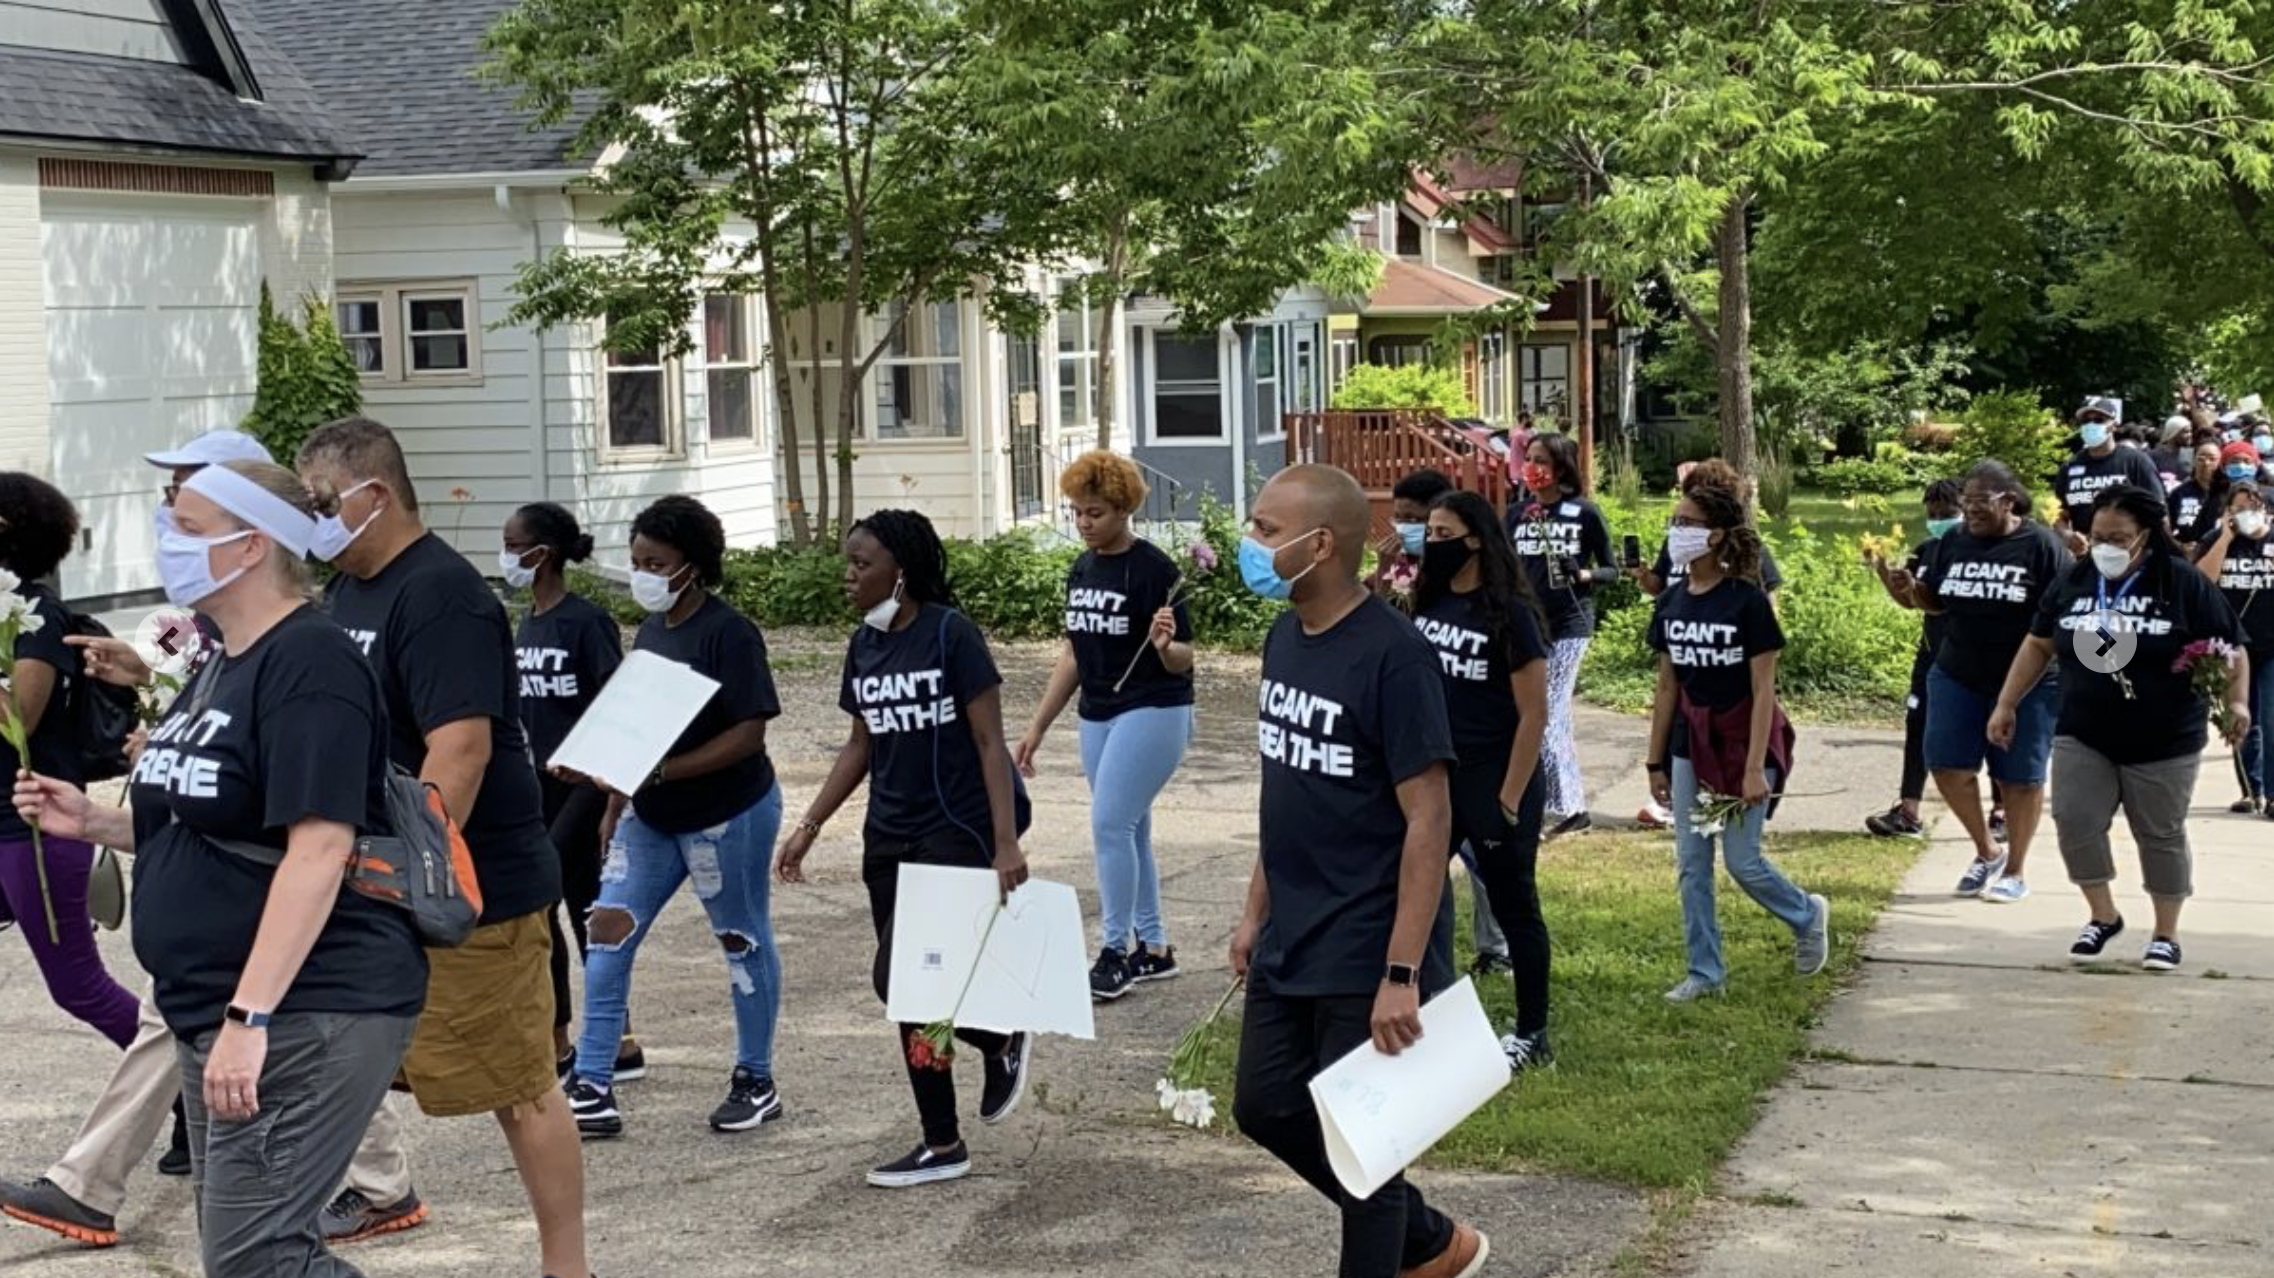 Adventist youth in Minneapolis march peacefully on June 30, 2020, as part of the Justice and Healing rally 